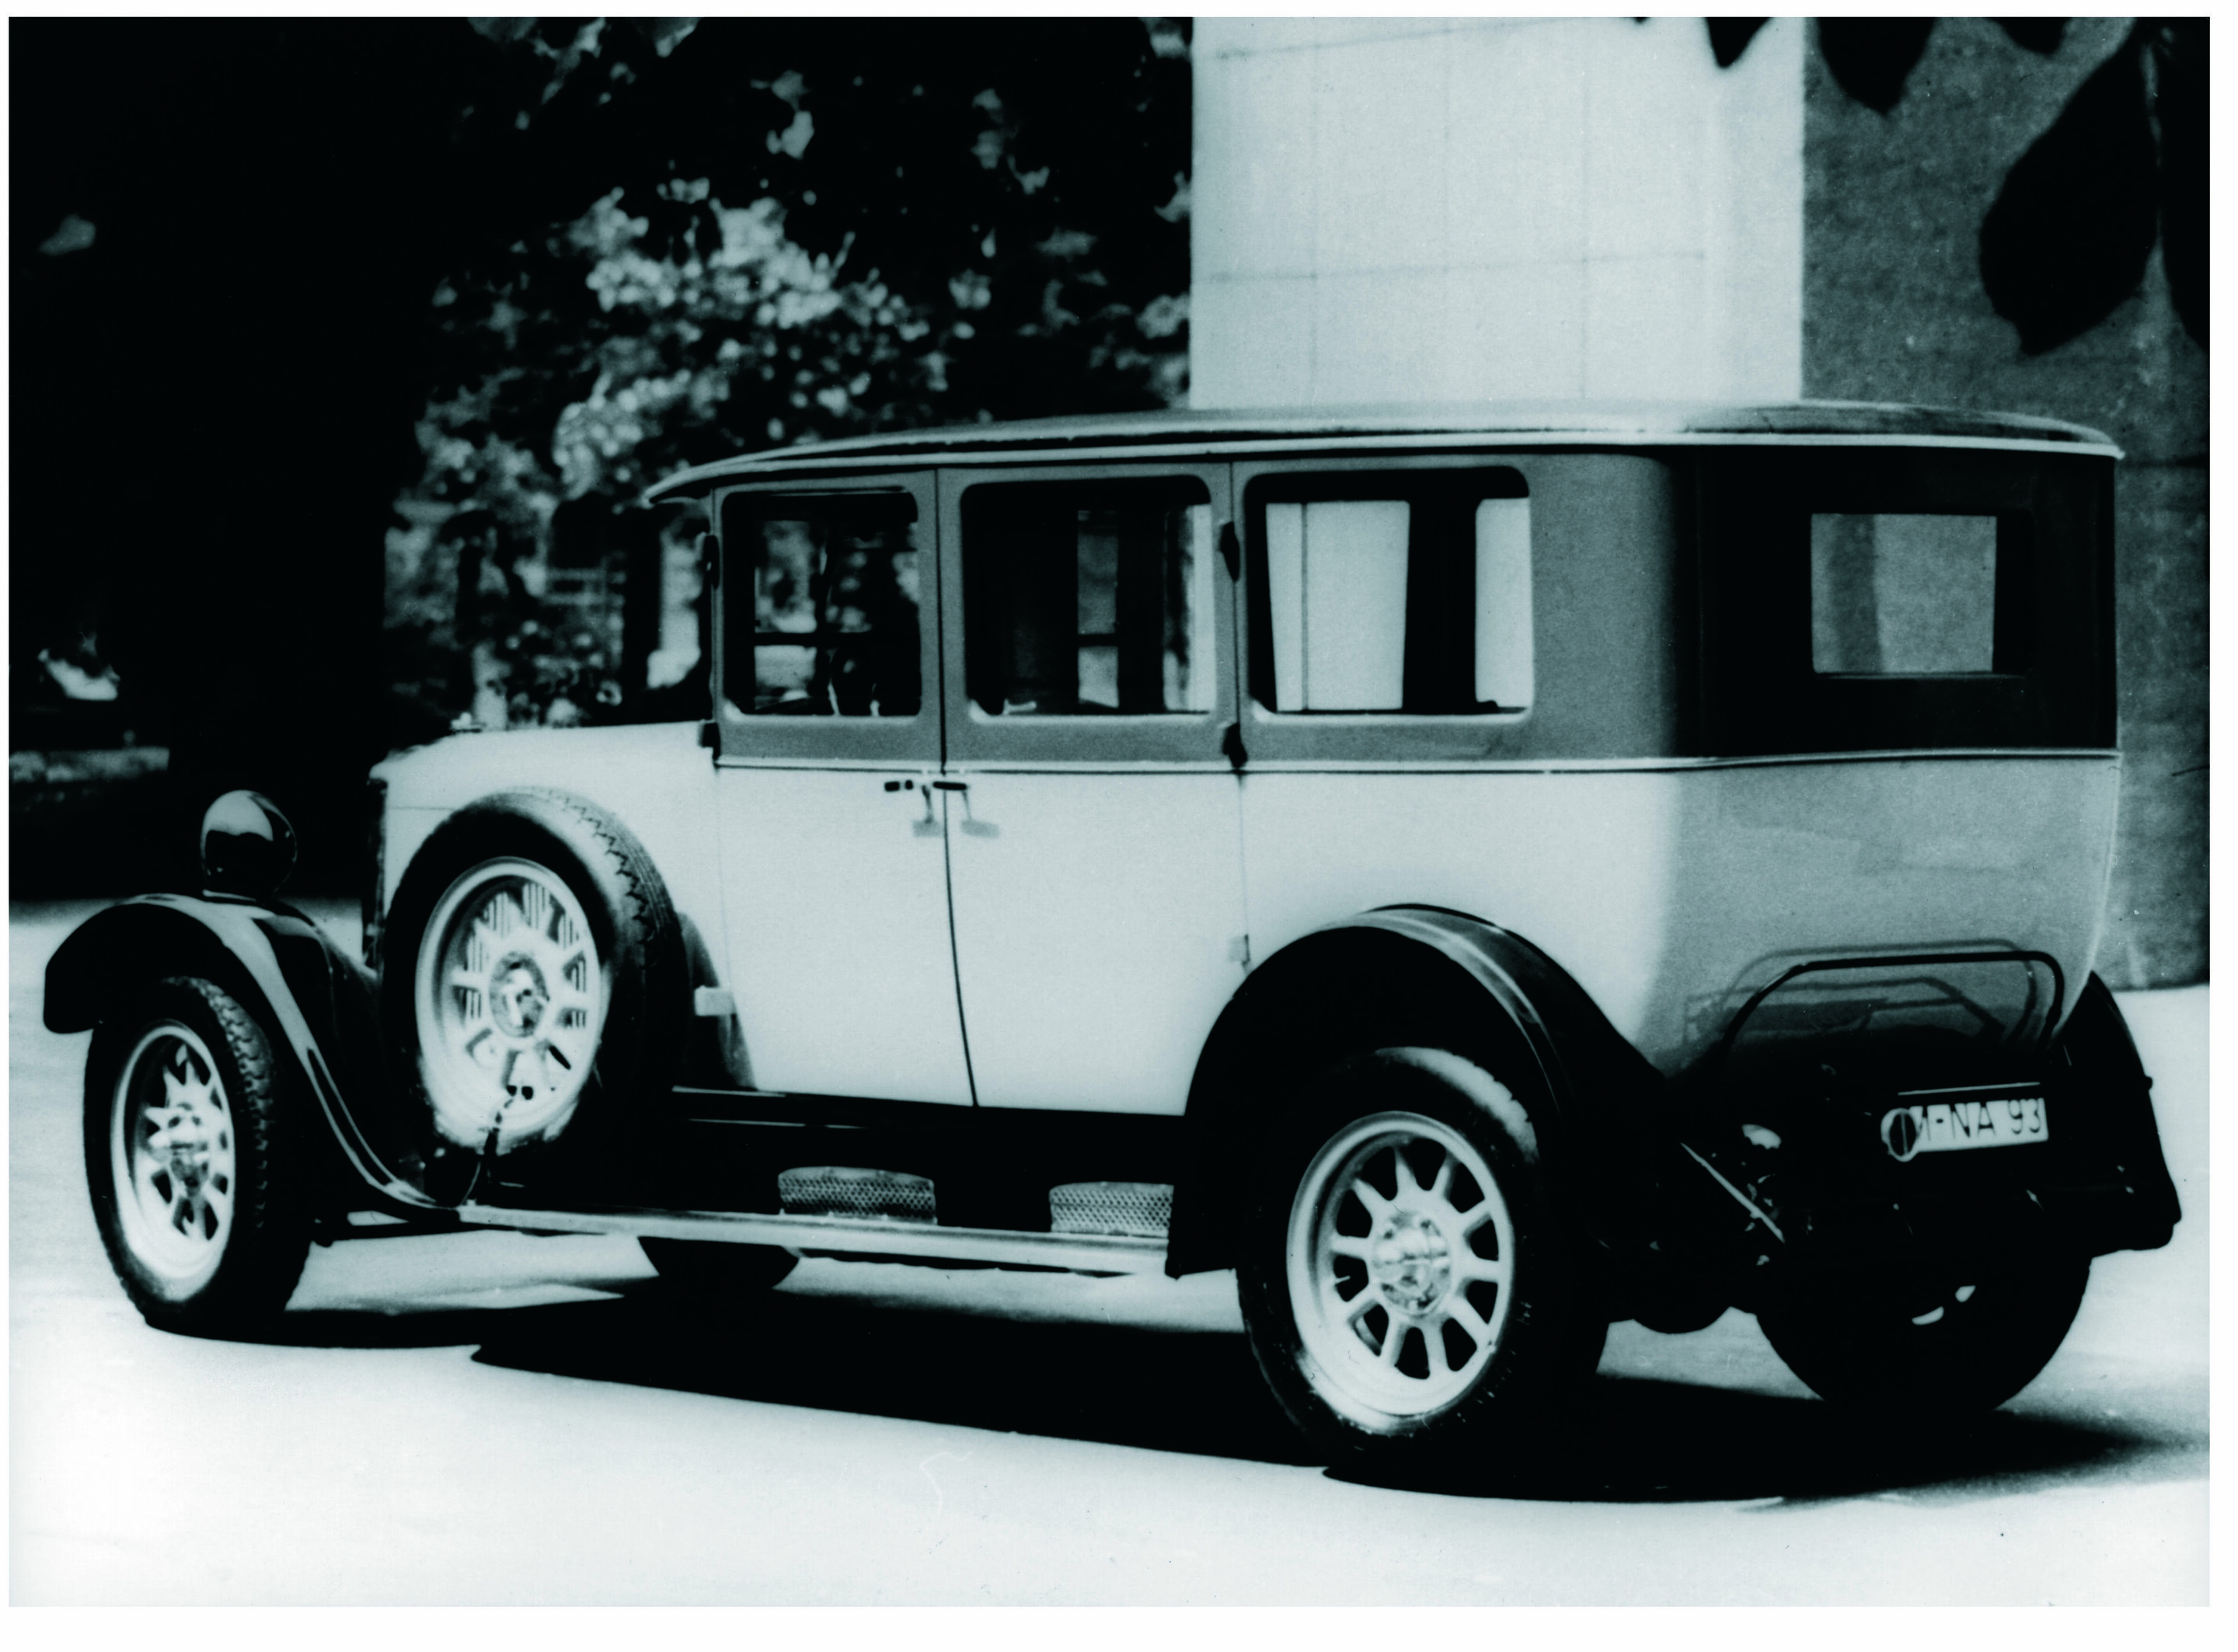 Horch Type 303 1926/1927 with 3.2 litre 8-cylinder engine. The first production 8-cylinder engine in Germany